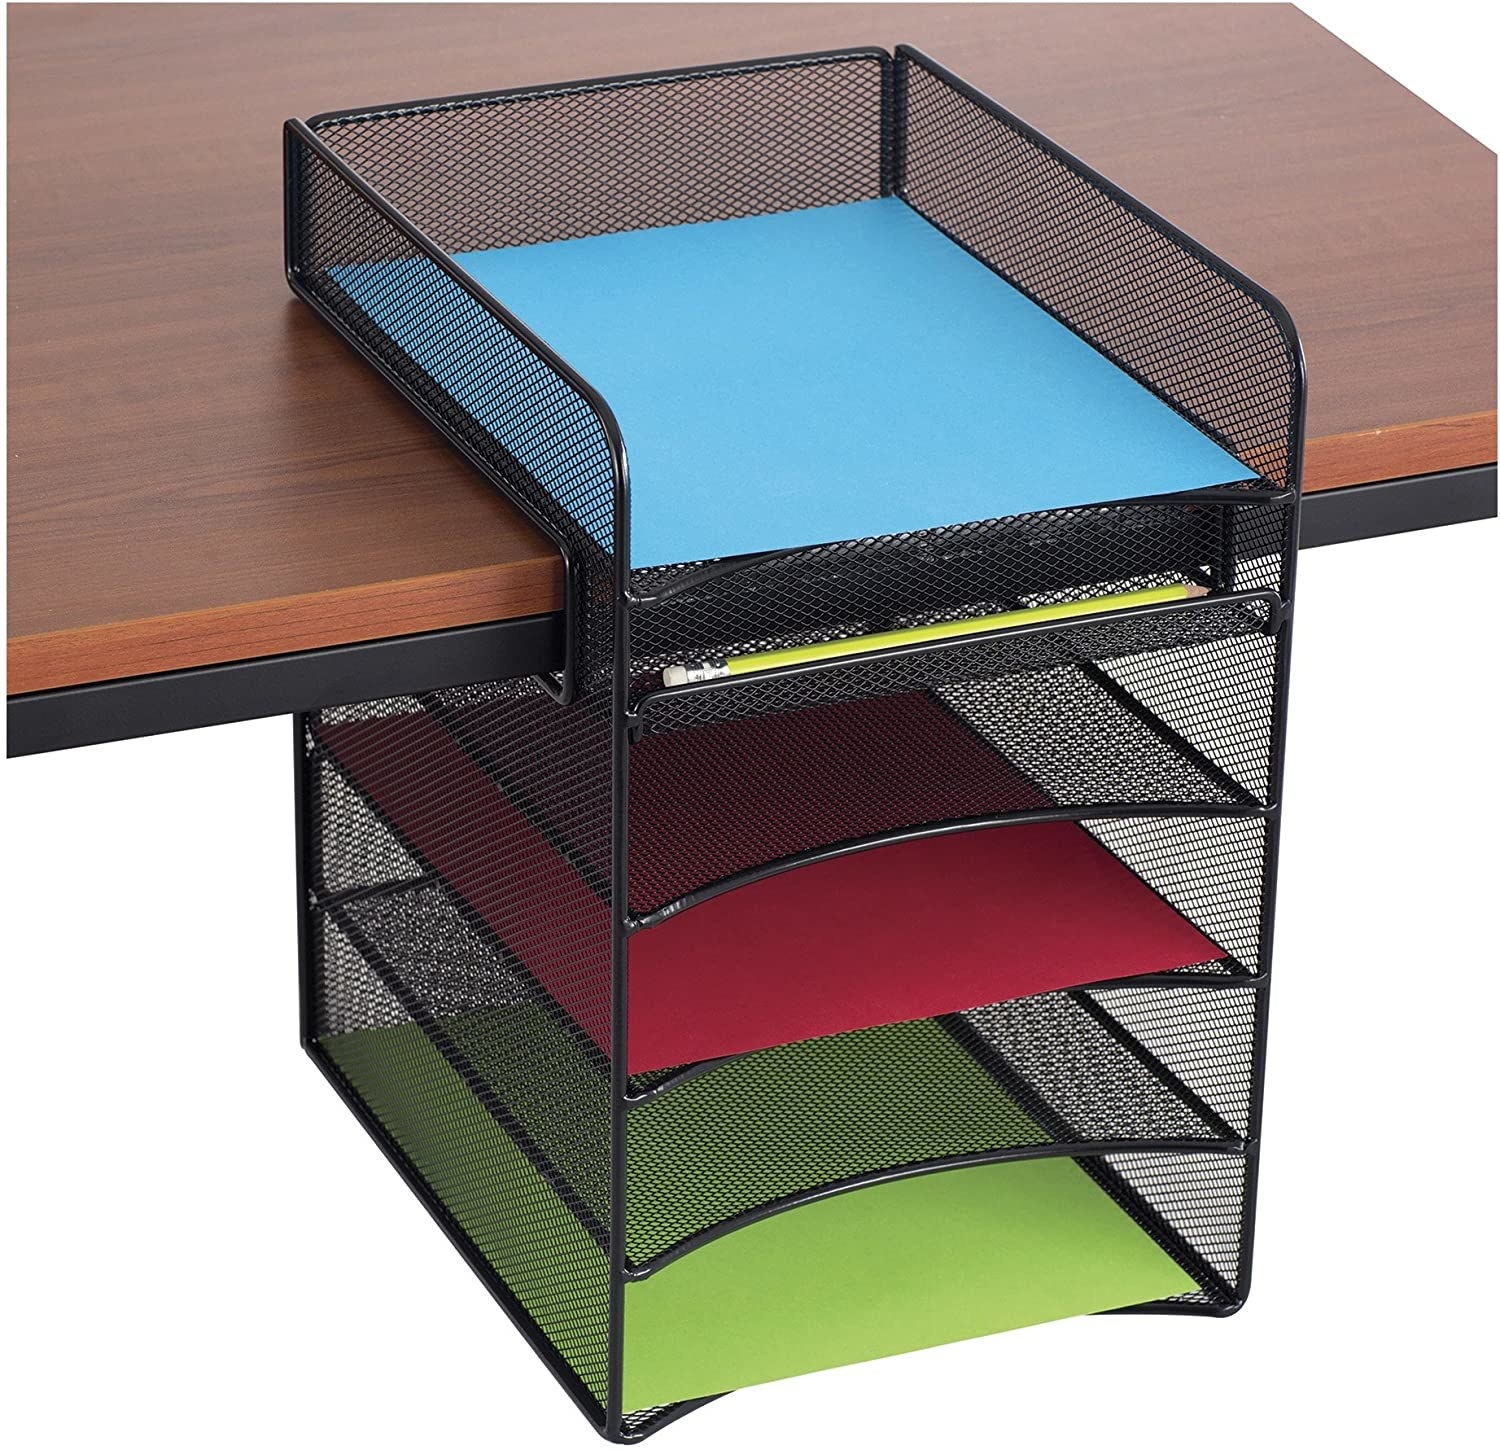 Metal mesh five-tray organizer in black with paper in three of the trays